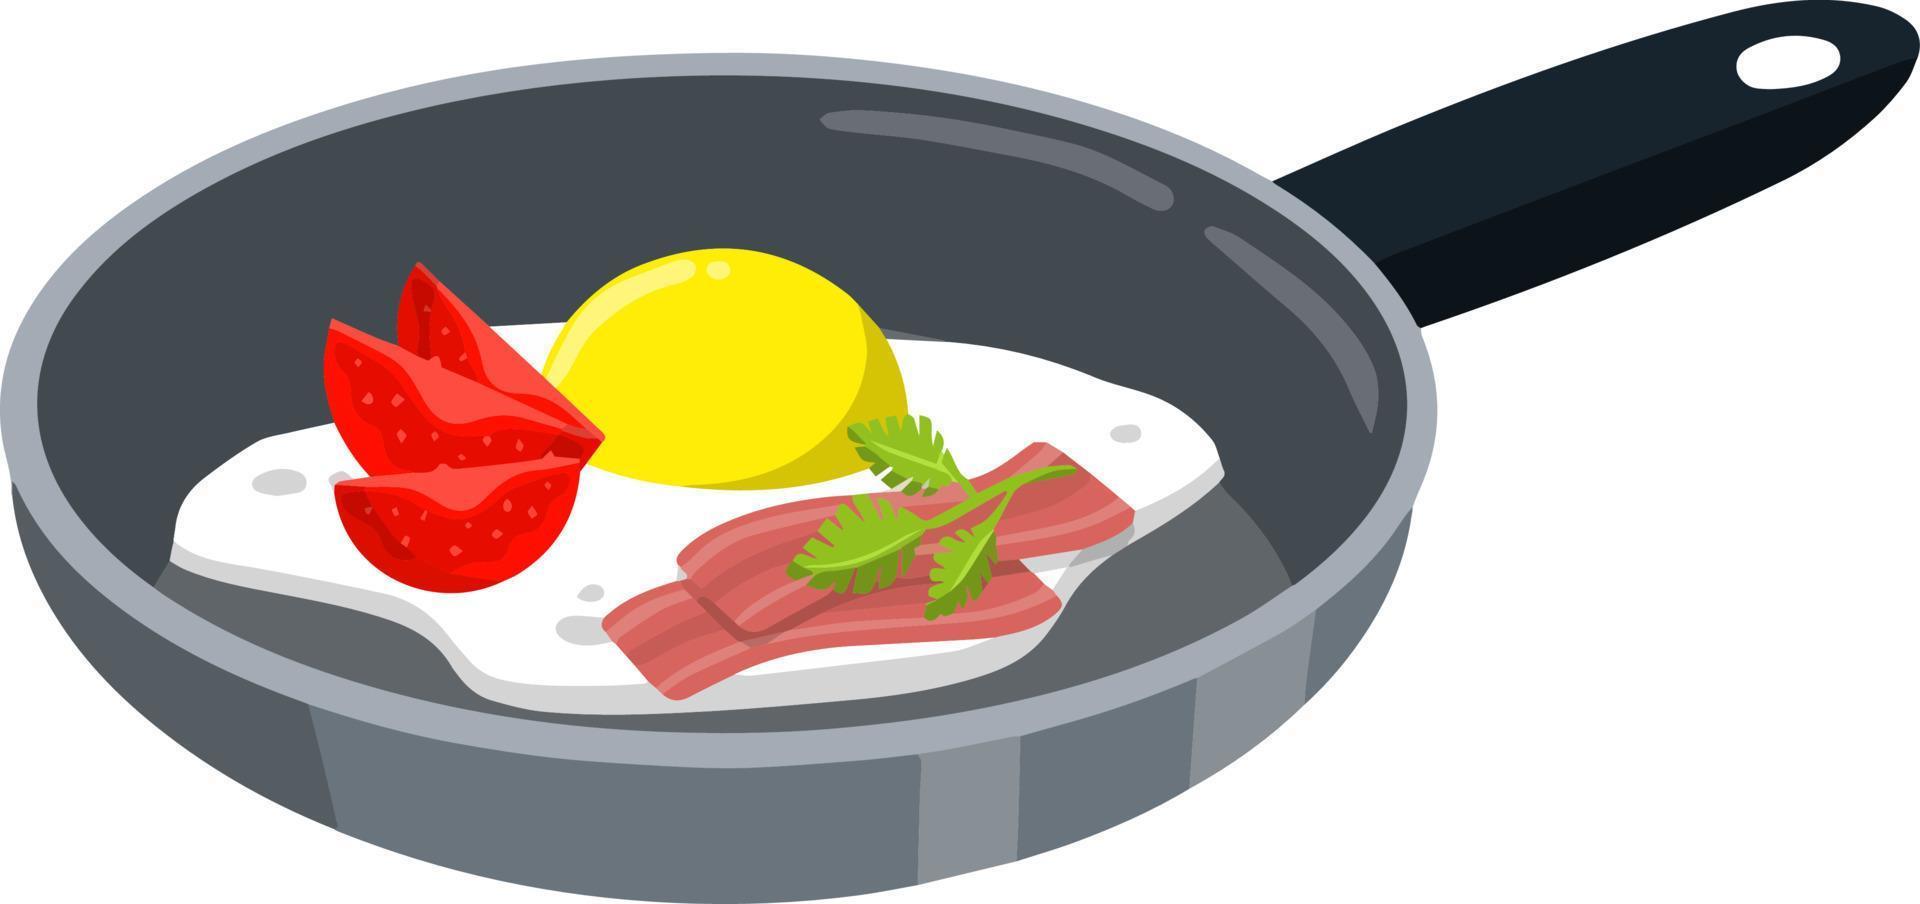 Kitchen frying pan with nutritious Breakfast. Omelet with pieces of fried bacon. High-calorie food vector